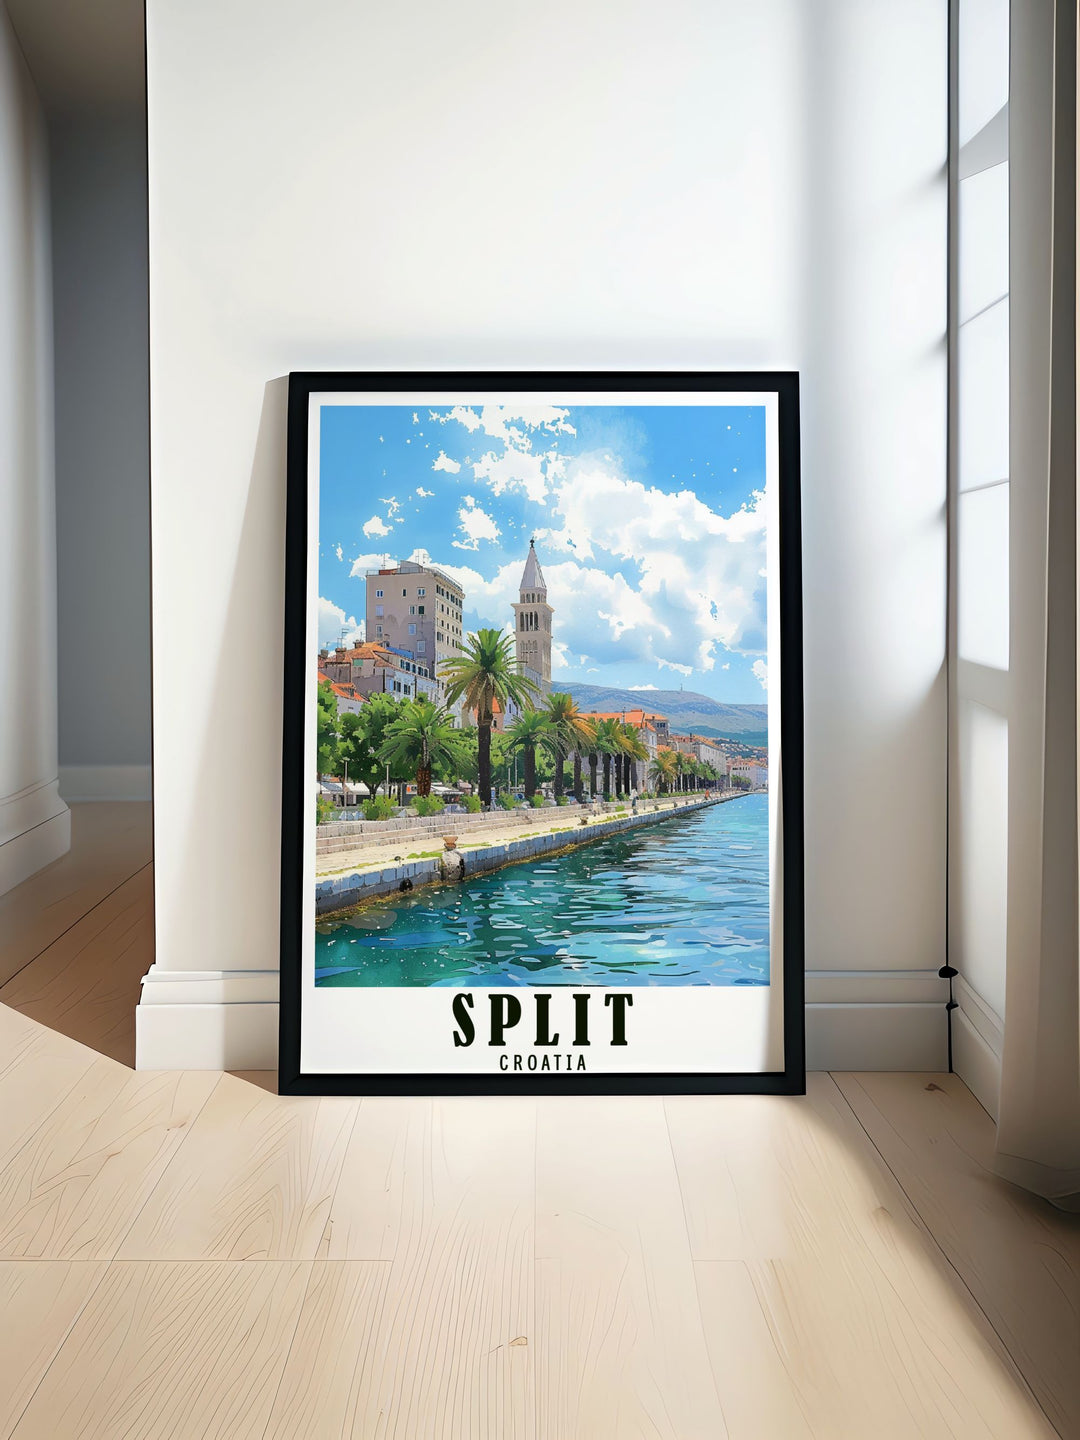 Featuring the majestic Riva Promenade, this poster celebrates the unique blend of history and coastal beauty in Split, inviting viewers to explore the citys iconic sites and vibrant atmosphere.